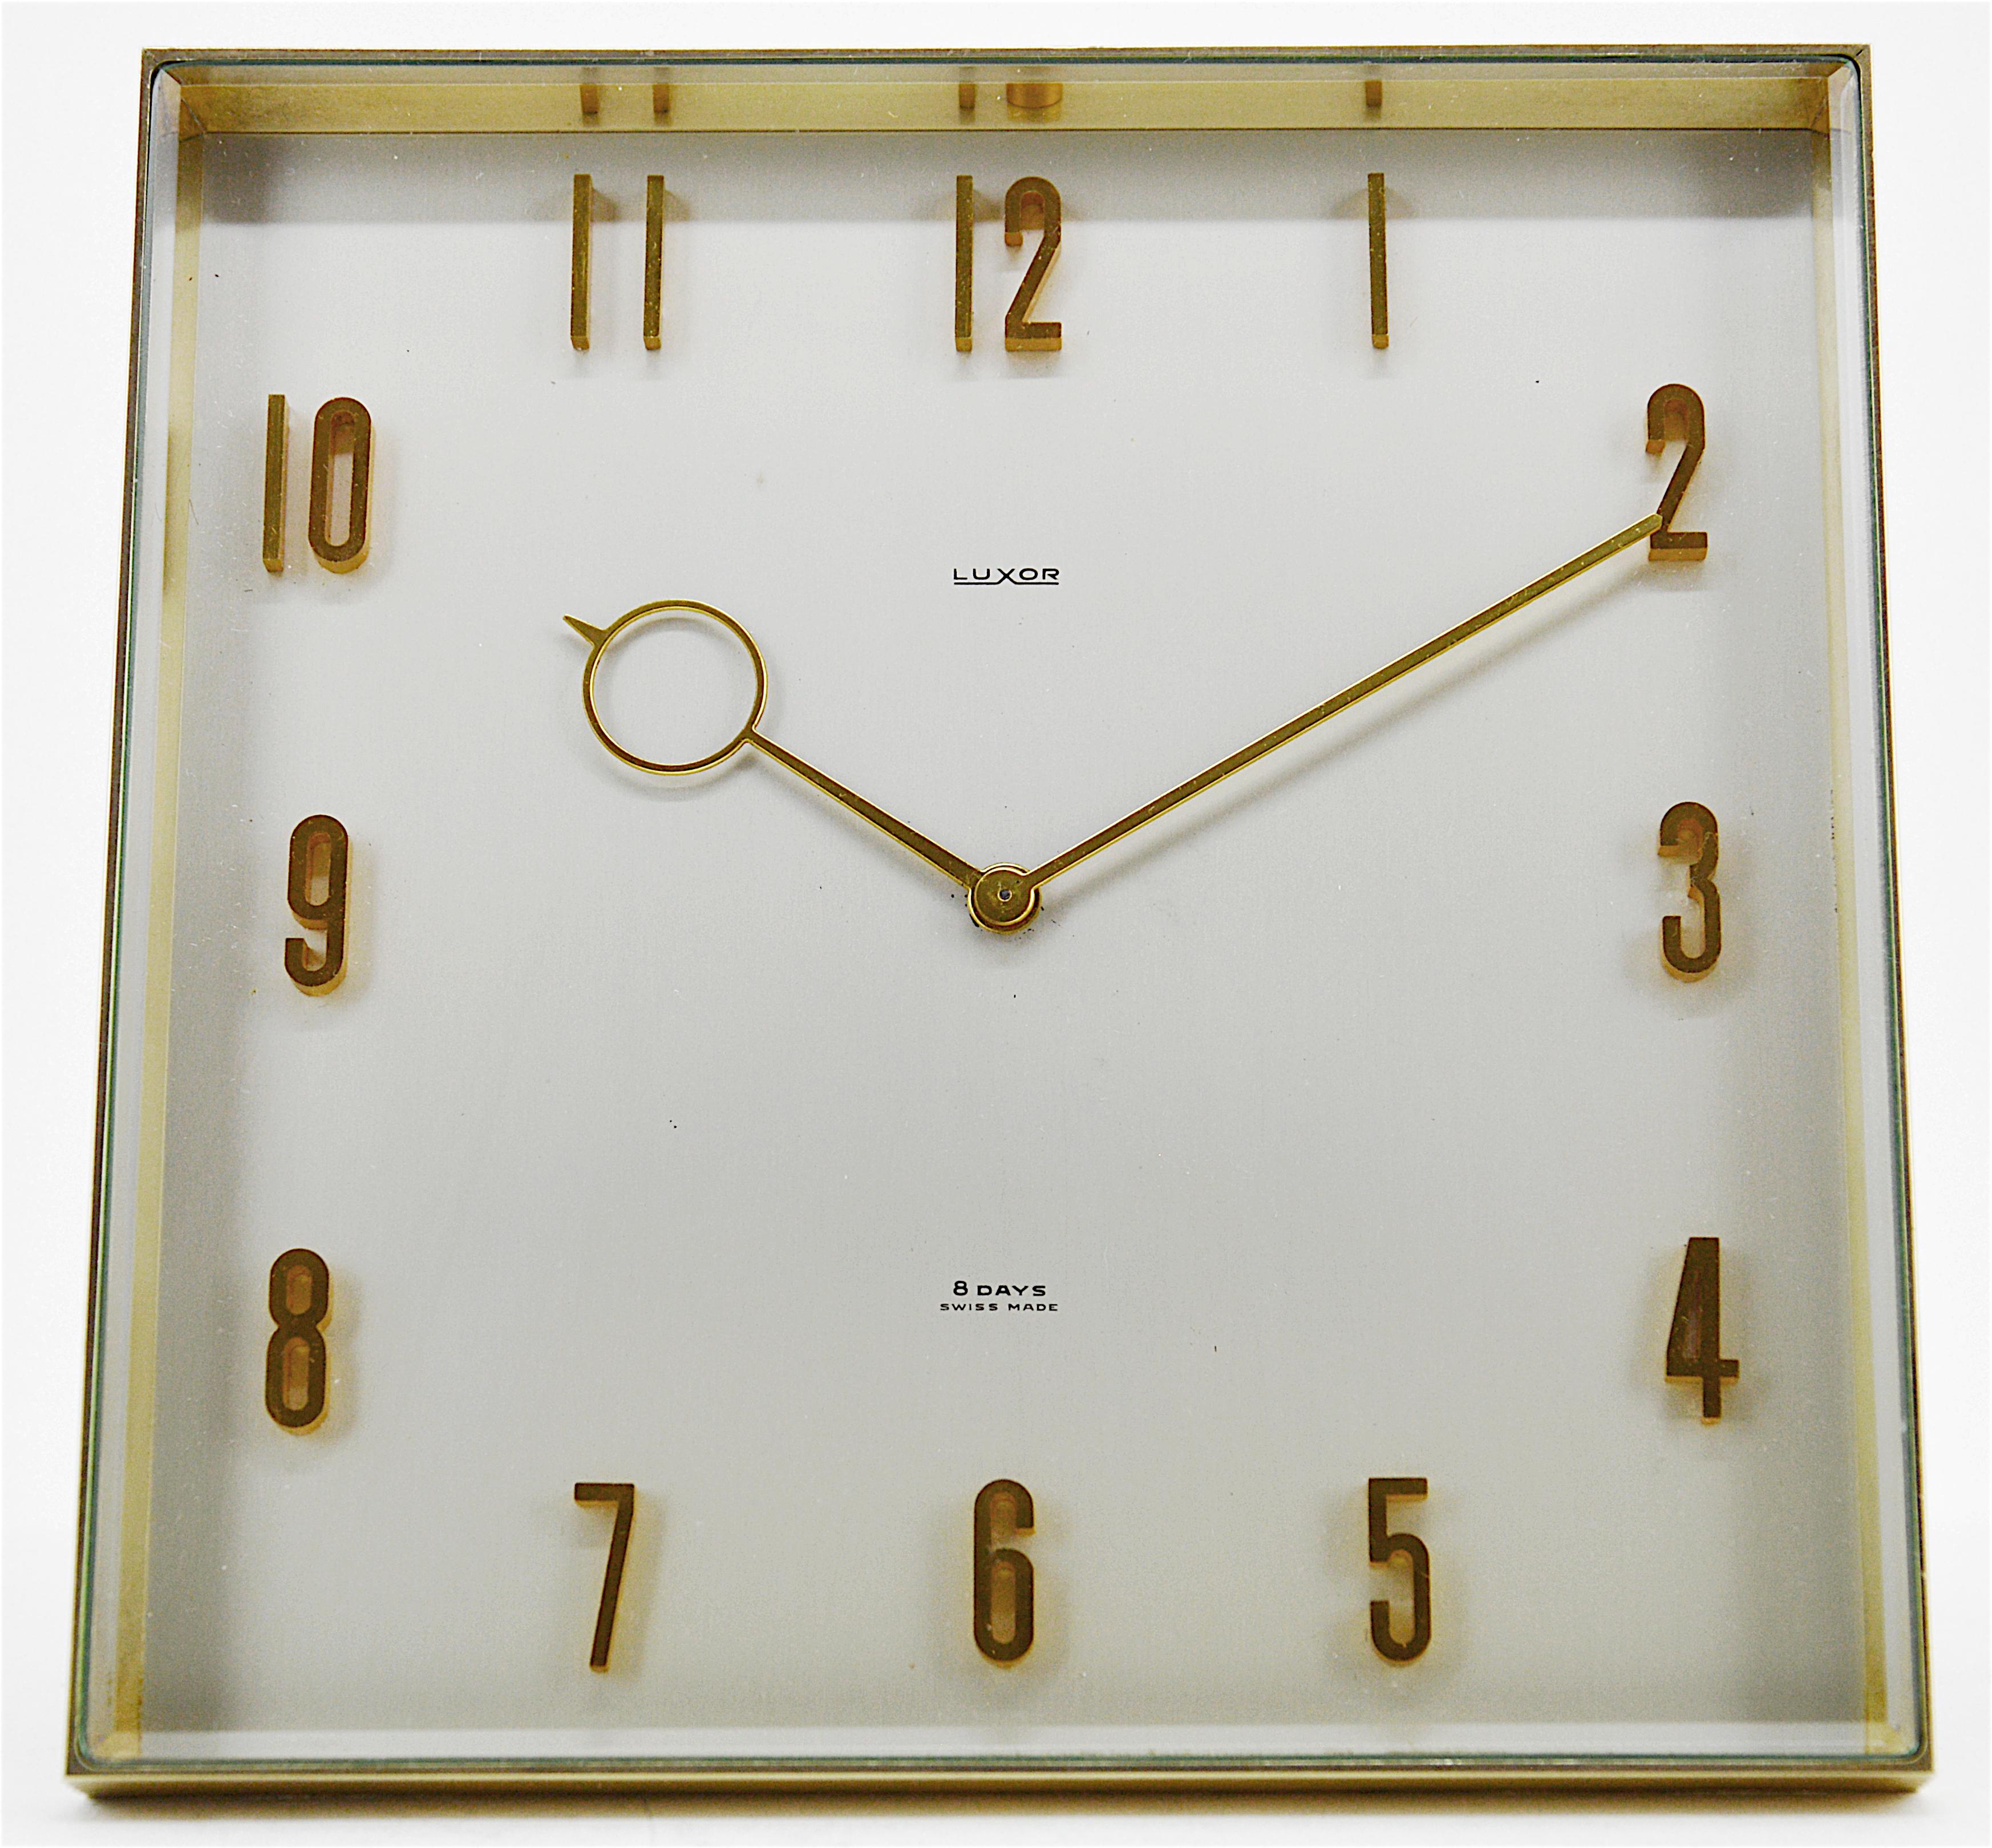 Any fair offer will be examined with the utmost attention, please send a message. Midcentury table clock by Luxor, Switzerland, 1950s. Brass and glass. Thick beveled front glass. 8 days movement. Measures: Height 5.9